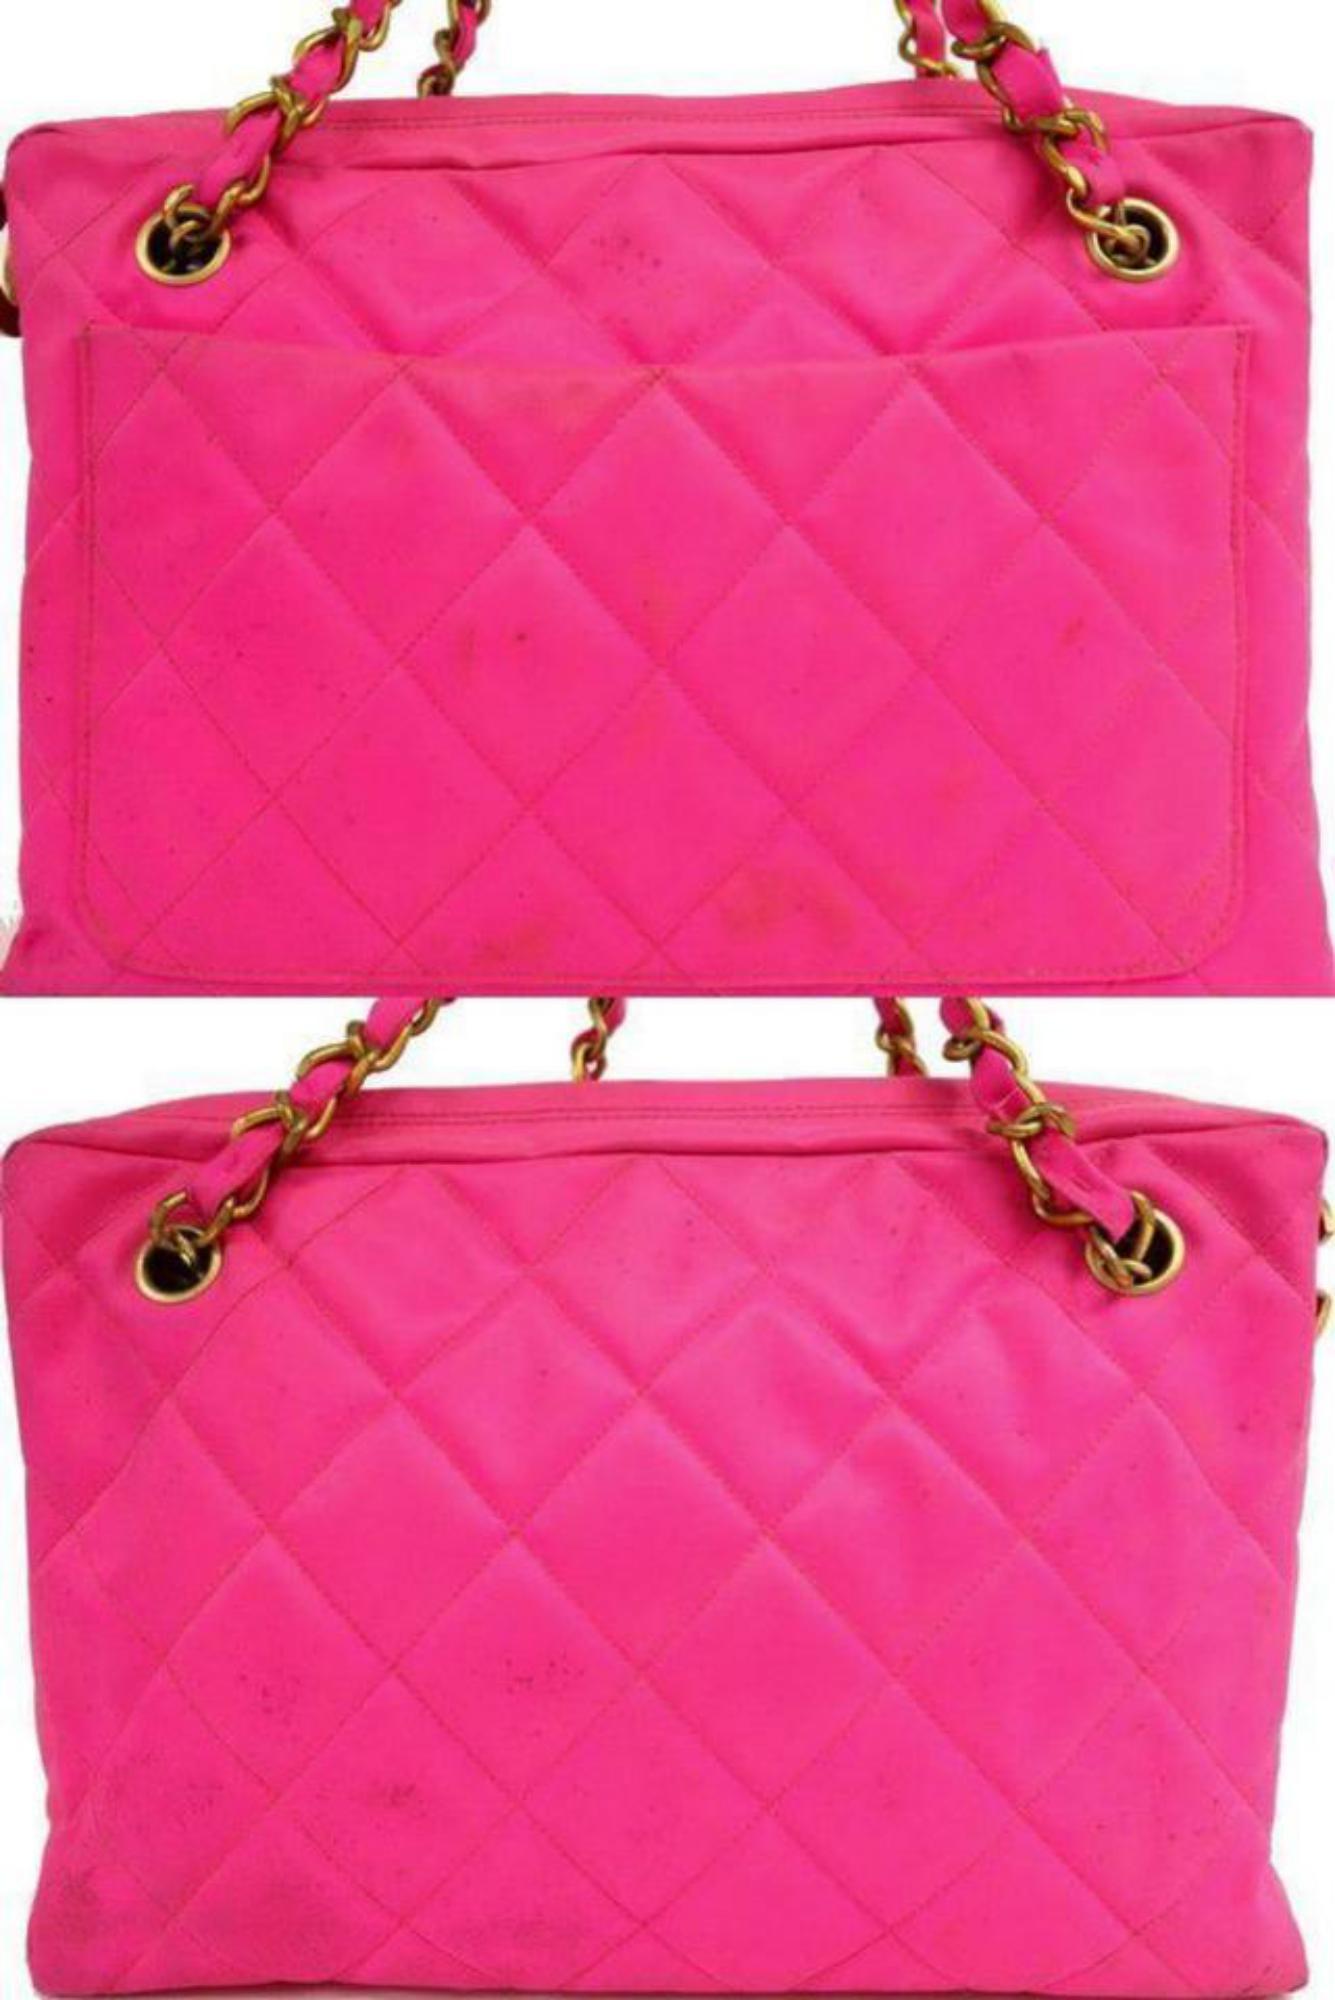 Chanel Camera Quilted Neon Hot Cc Charm Chain Tote 231187 Pink Canvas Shoulder B For Sale 2